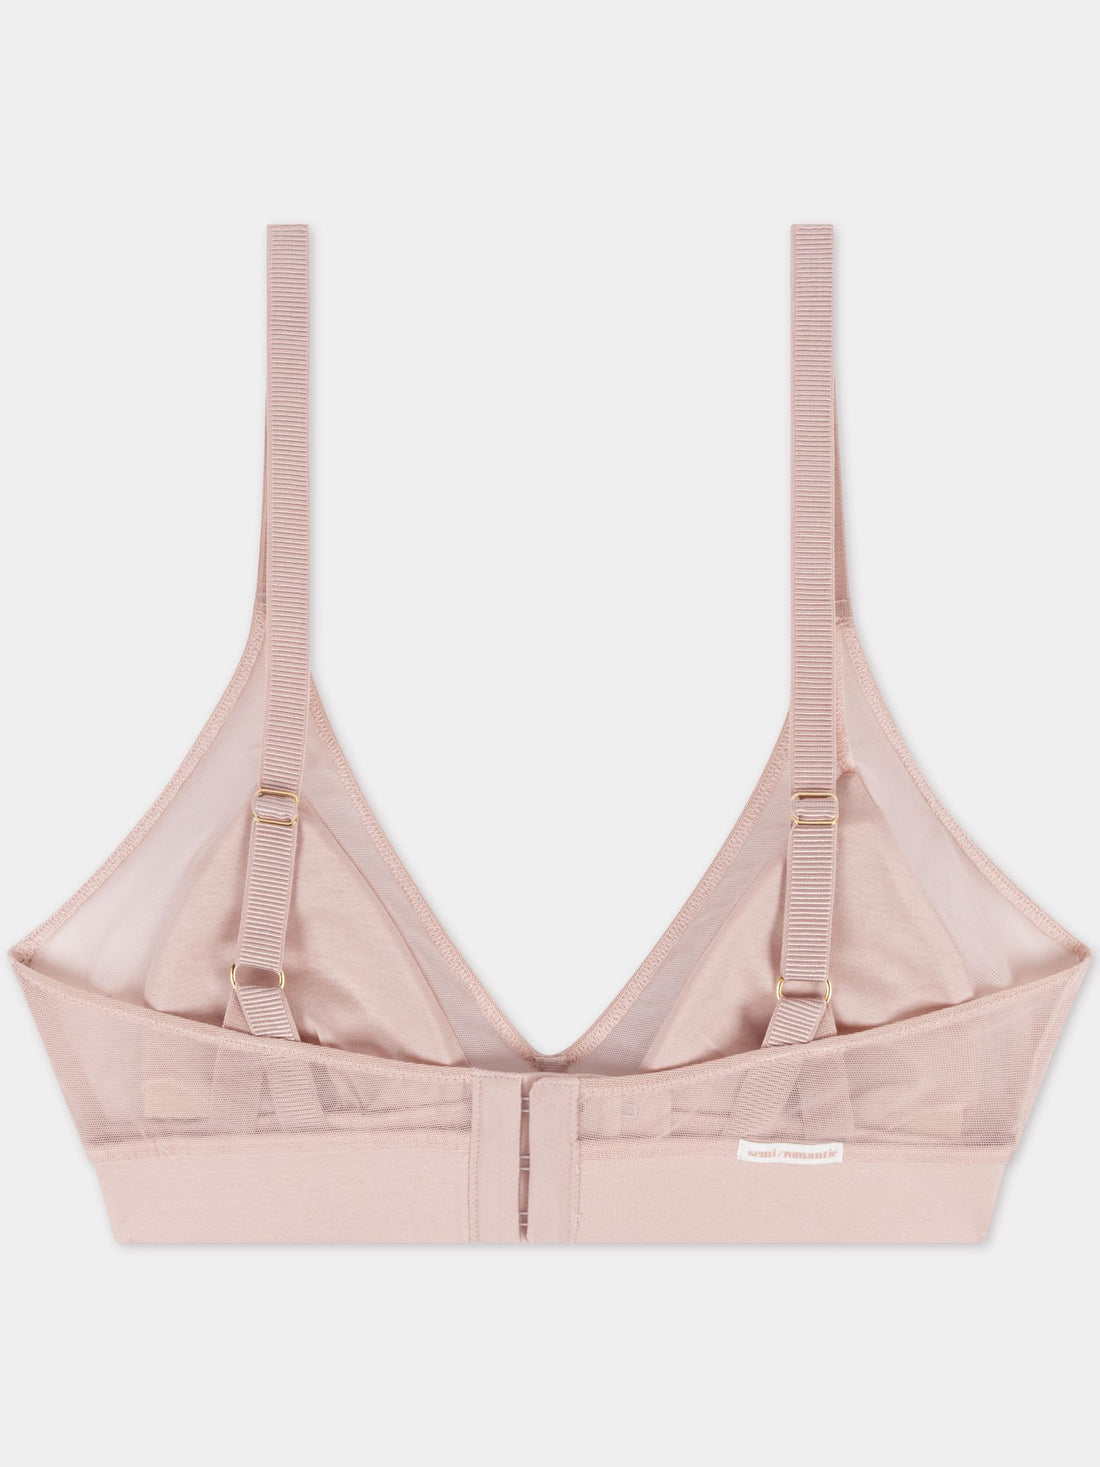 OLIVIA lingerie set - sheer lingerie, pink mesh and champagne lace  bralette/ double d/ salmon bralette/ sexy nude bralette/ front clasp/bra